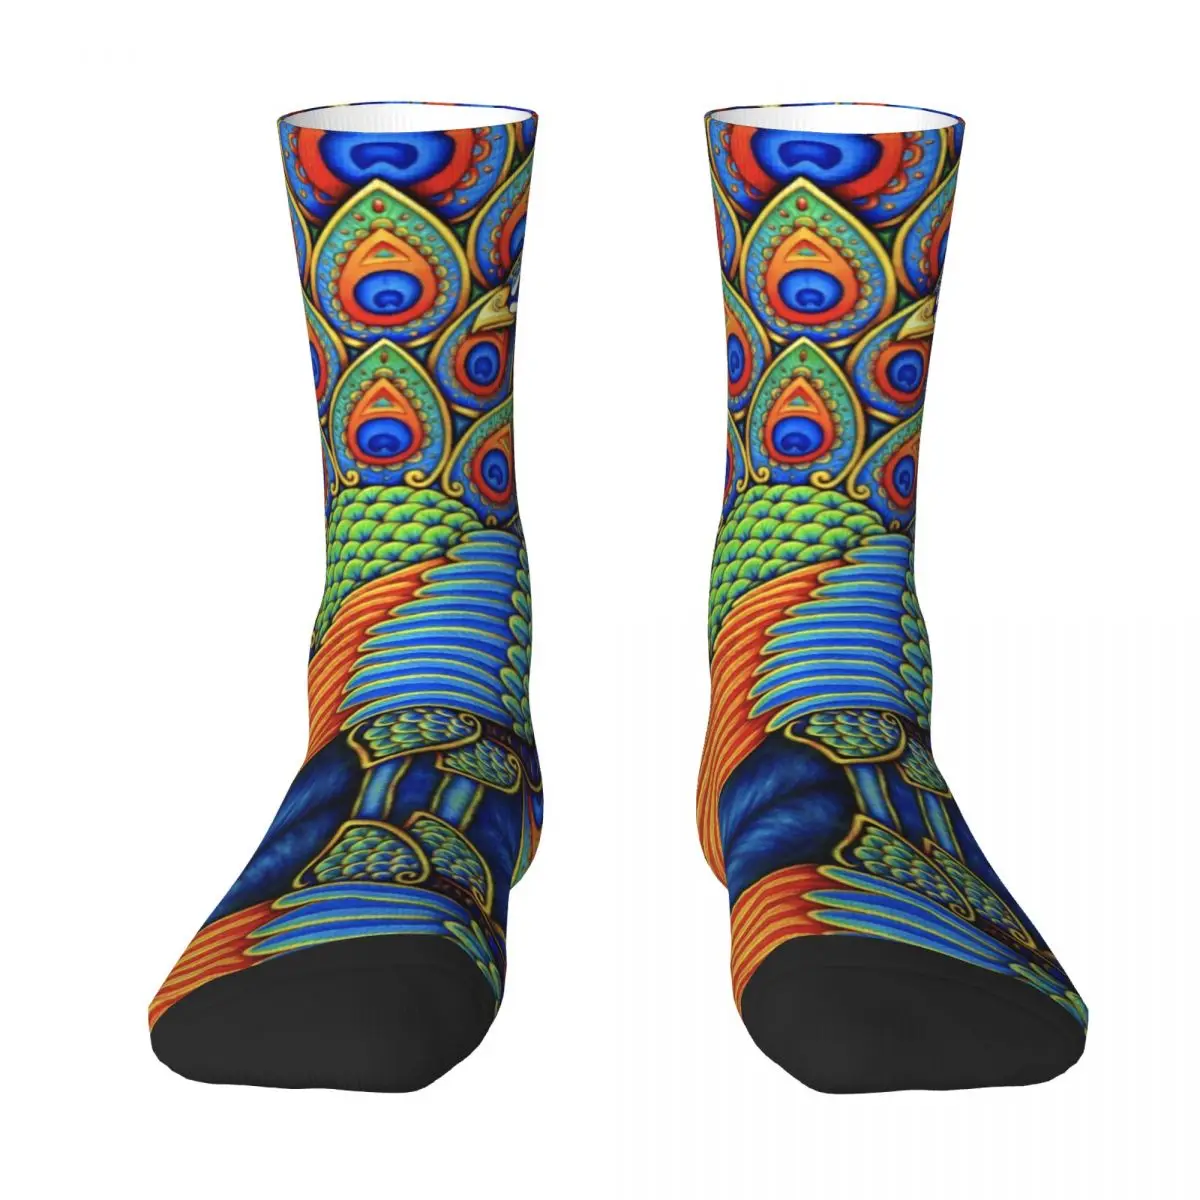 

Colorful Paisley Peacock Rainbow Bird R117 Stocking Graphic Vintage The Best Buy Color contrast Knapsack Geek Compression Socks